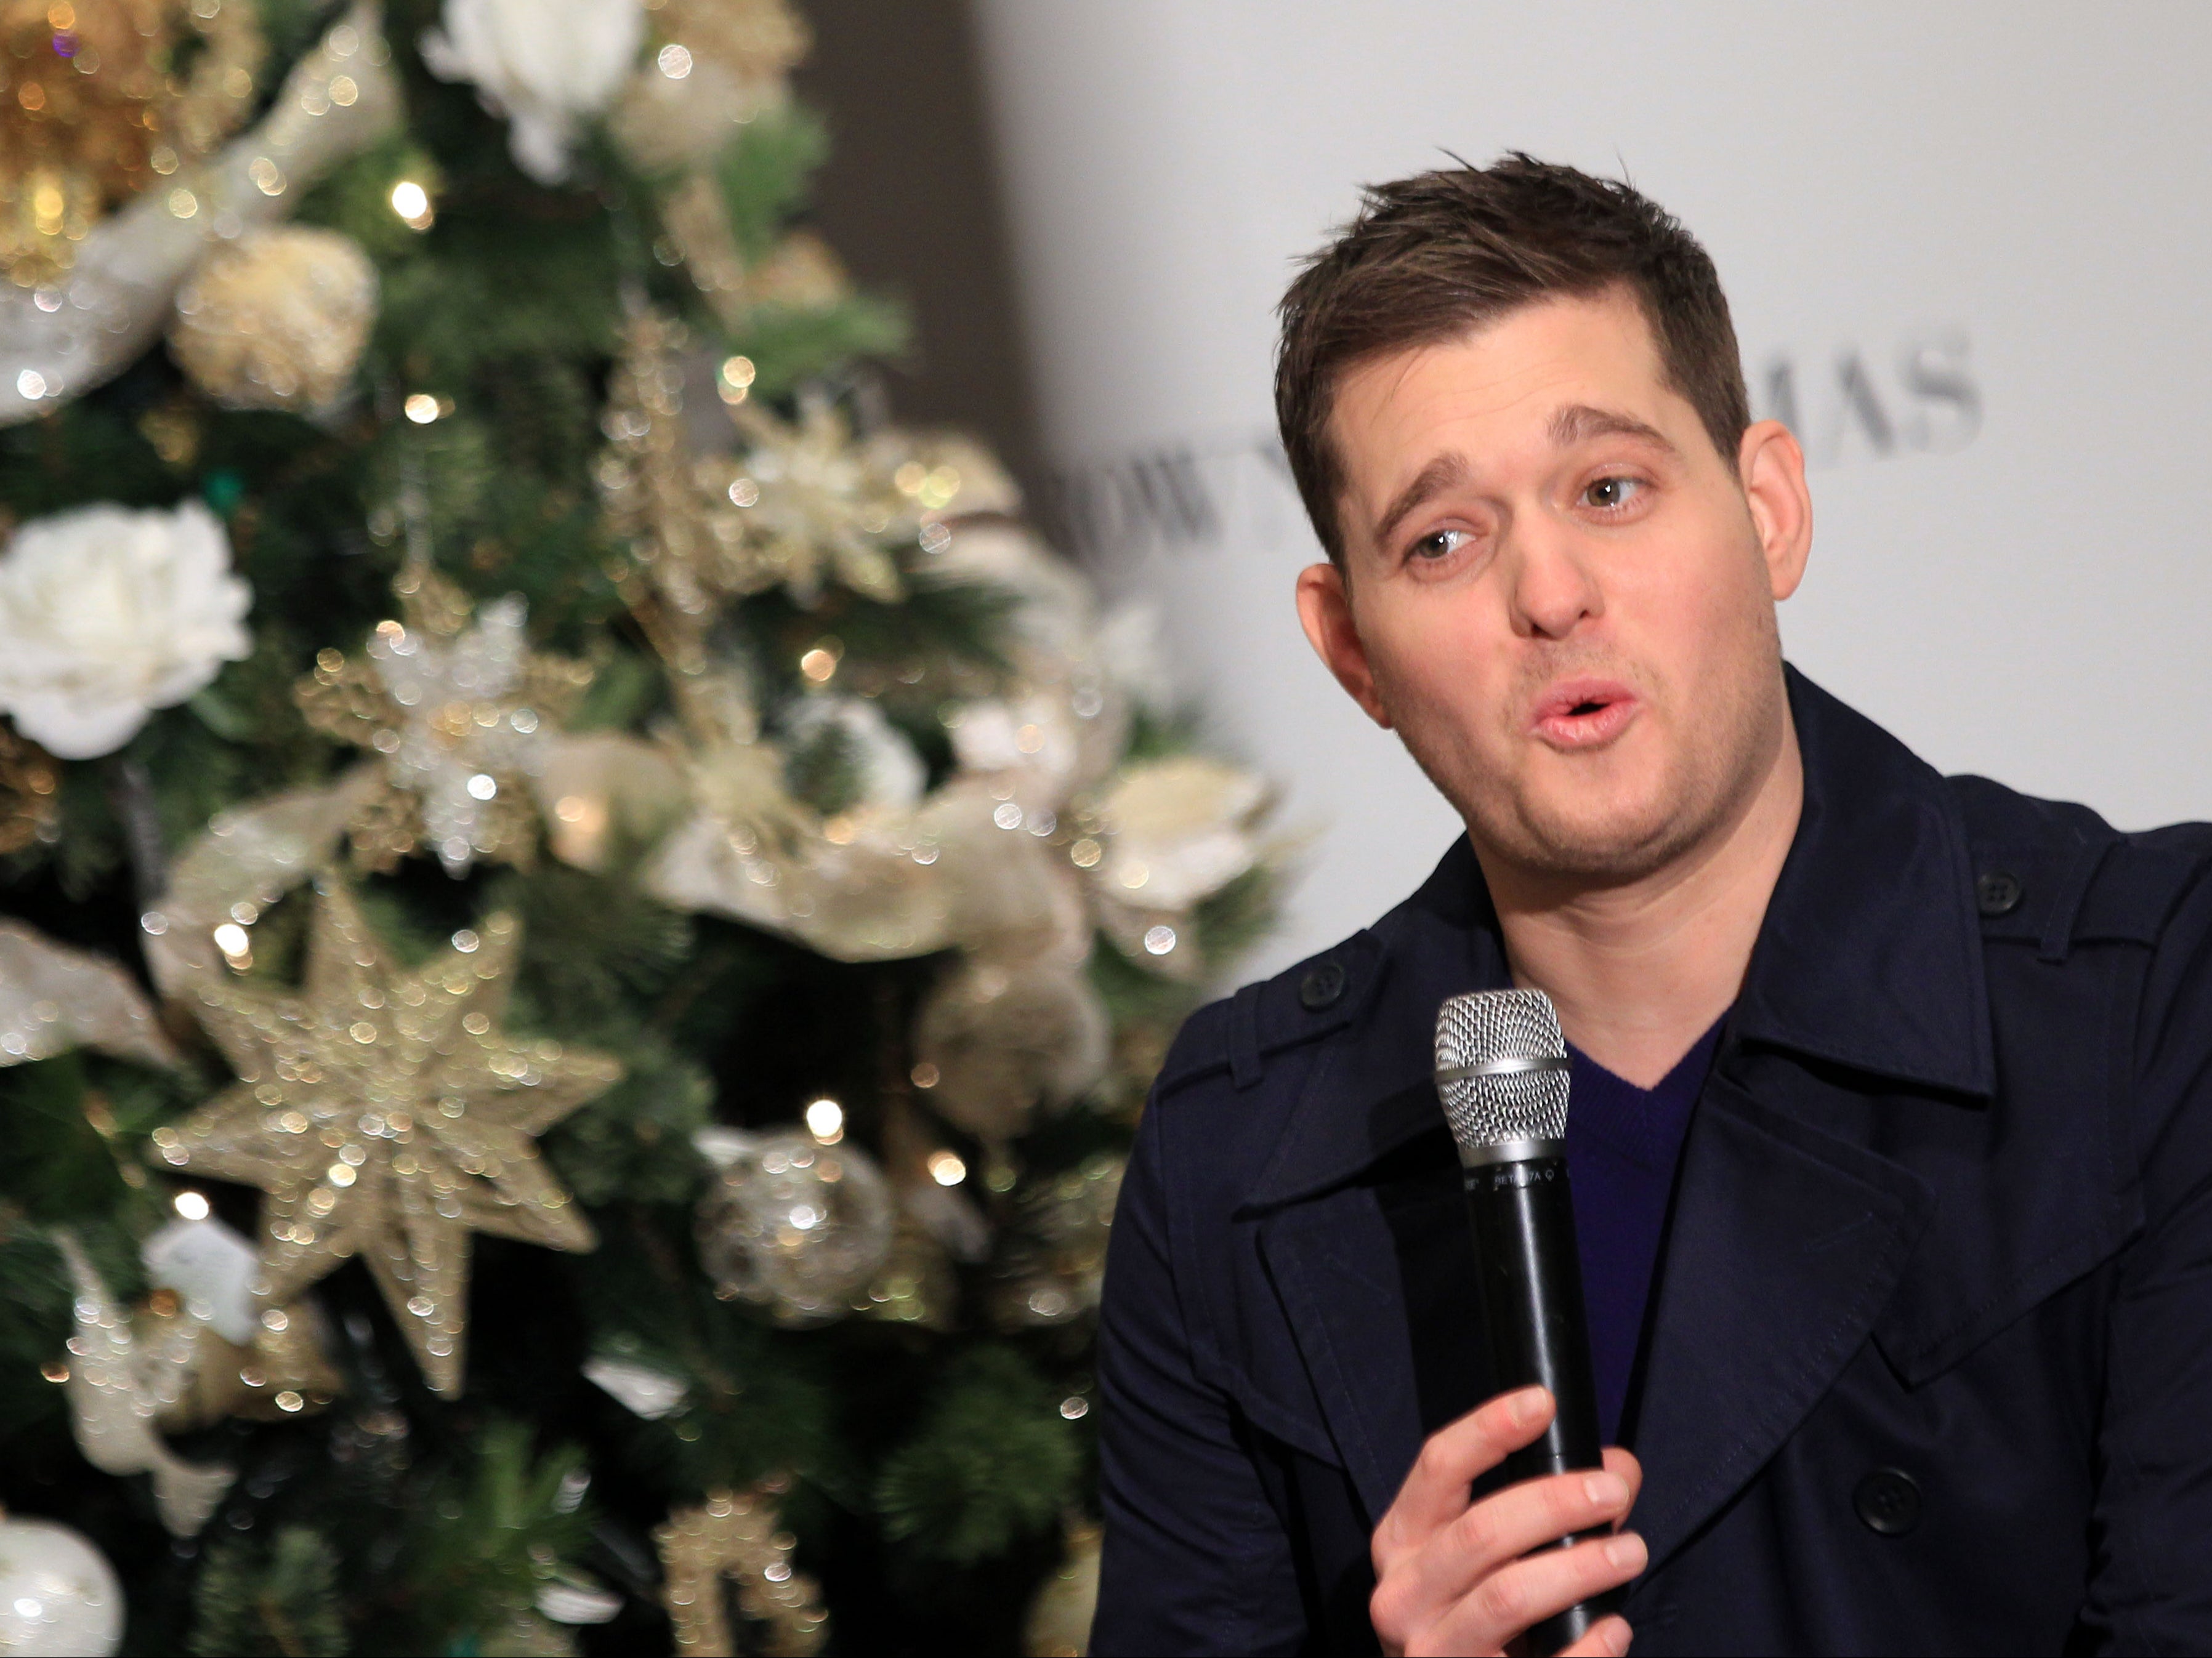 Michael Bublé promoting his ‘Christmas’ album in 2011